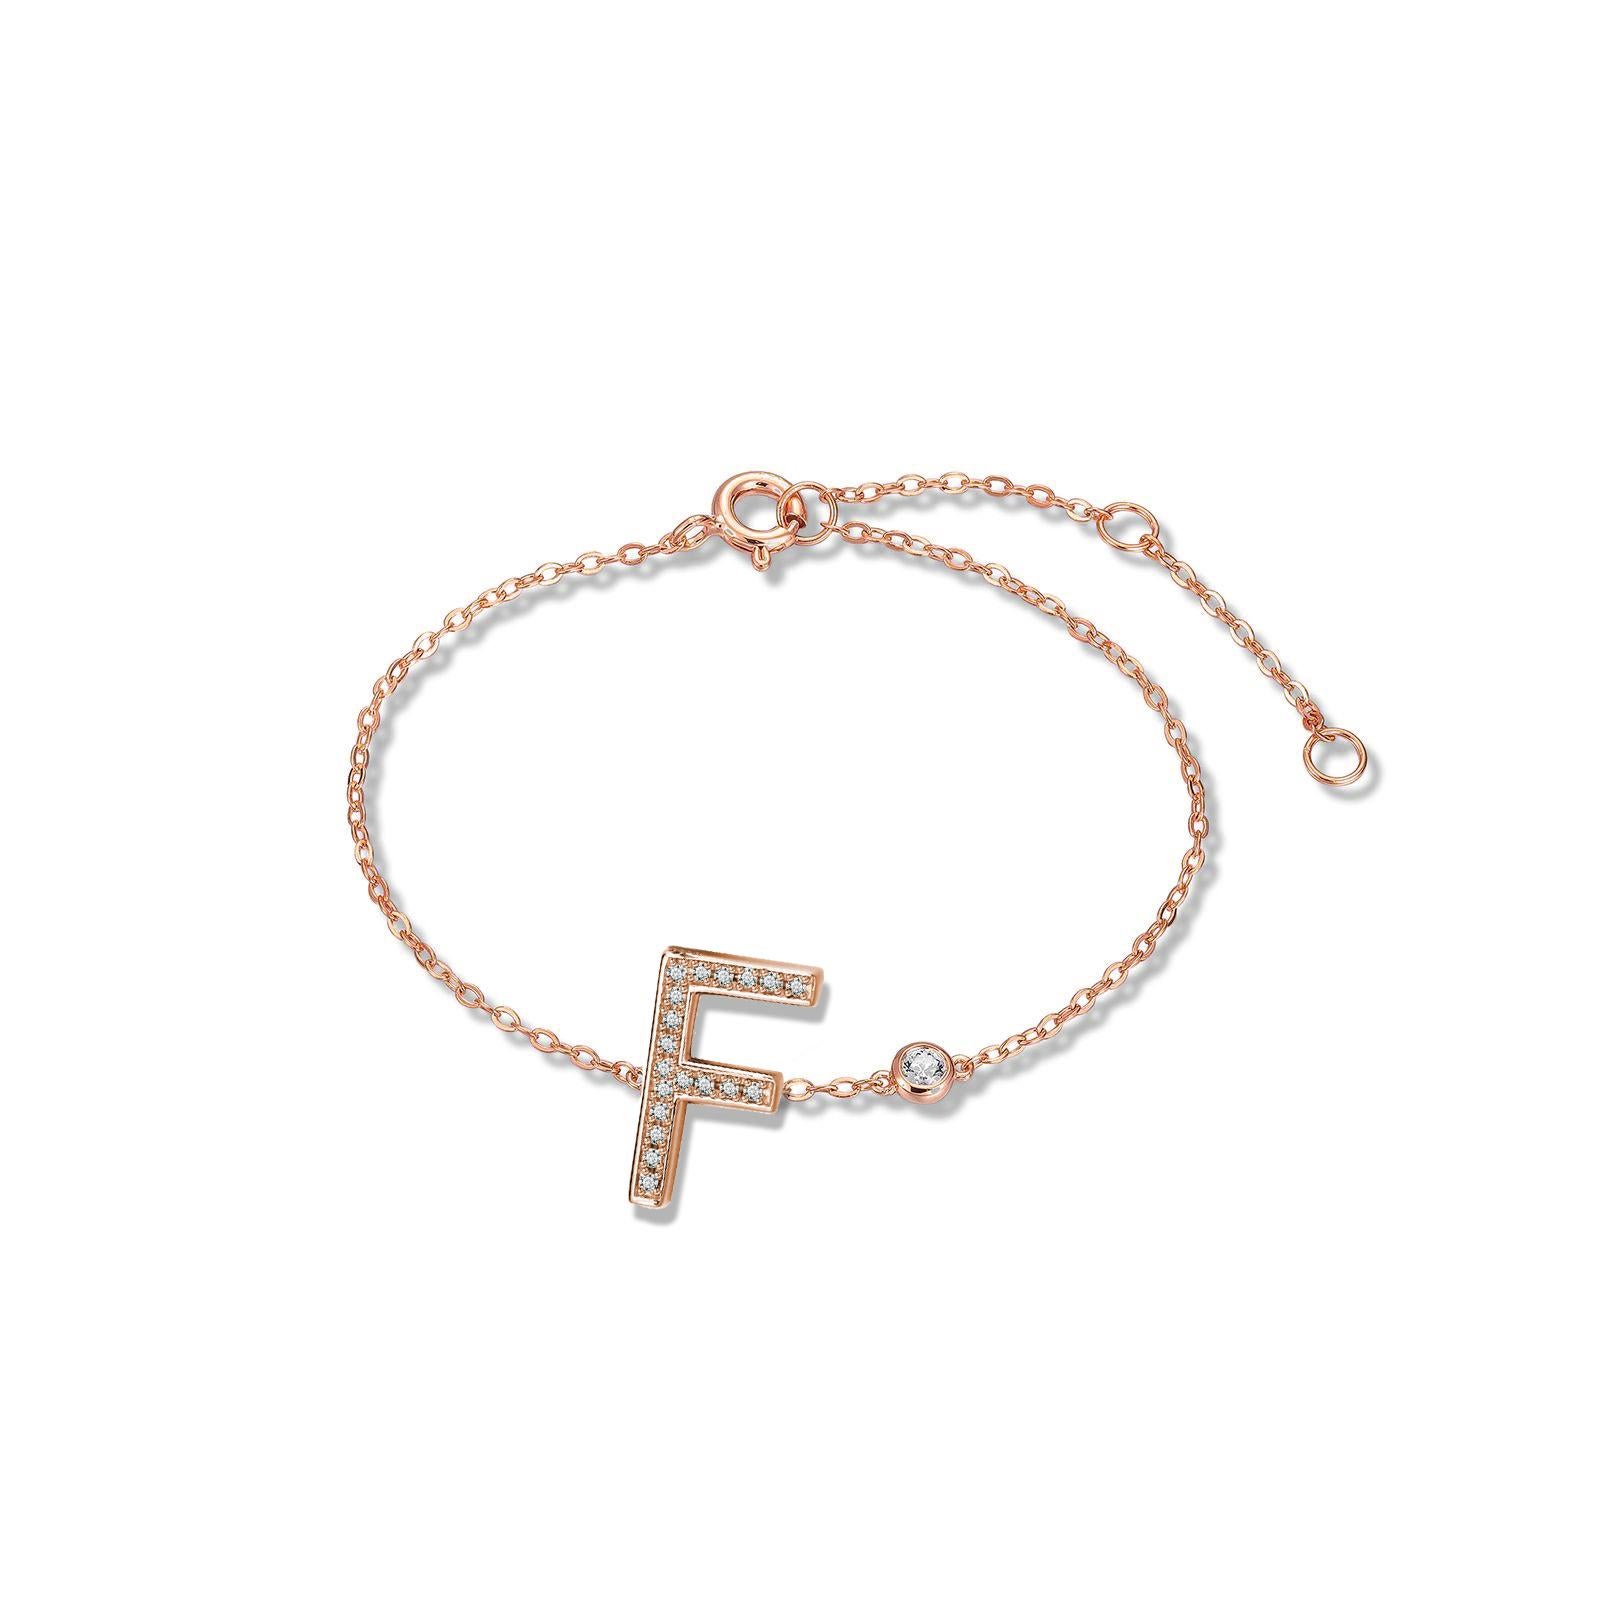 Nothing says YOU more than YOU. You are unique. You are bold.  You're not afraid to share who you are.  This initial bezel chain bracelet is elegantly slimline while sharing a little bit about yourself with others. .925 sterling silver base also